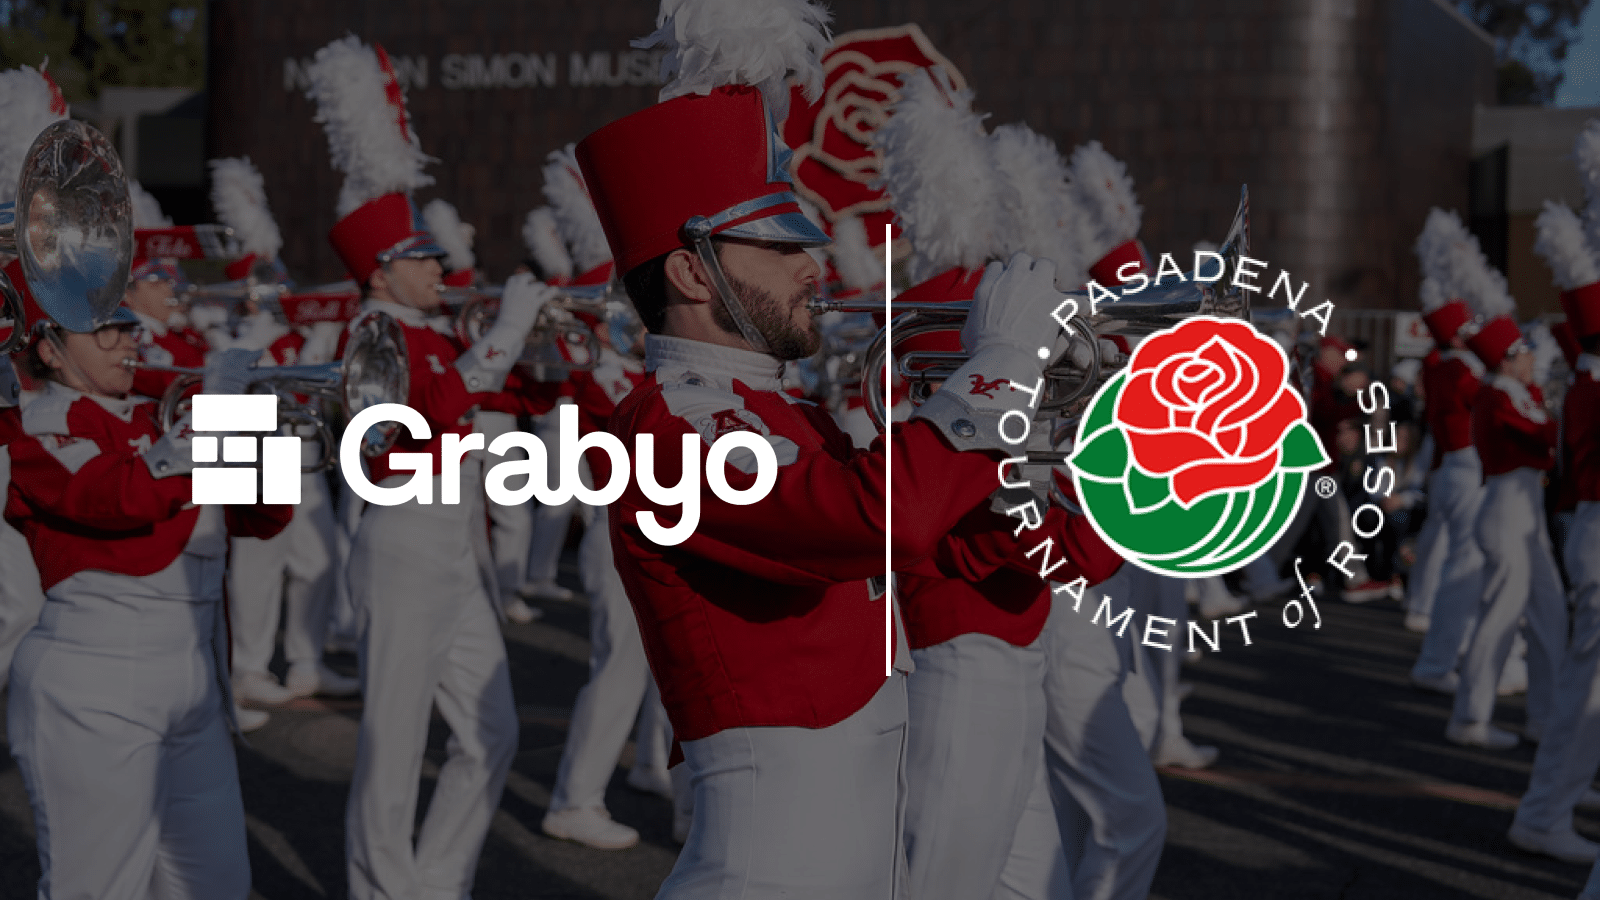 Cloud-based ad insertion: The Rose Parade streams to FAST & OTT using Grabyo